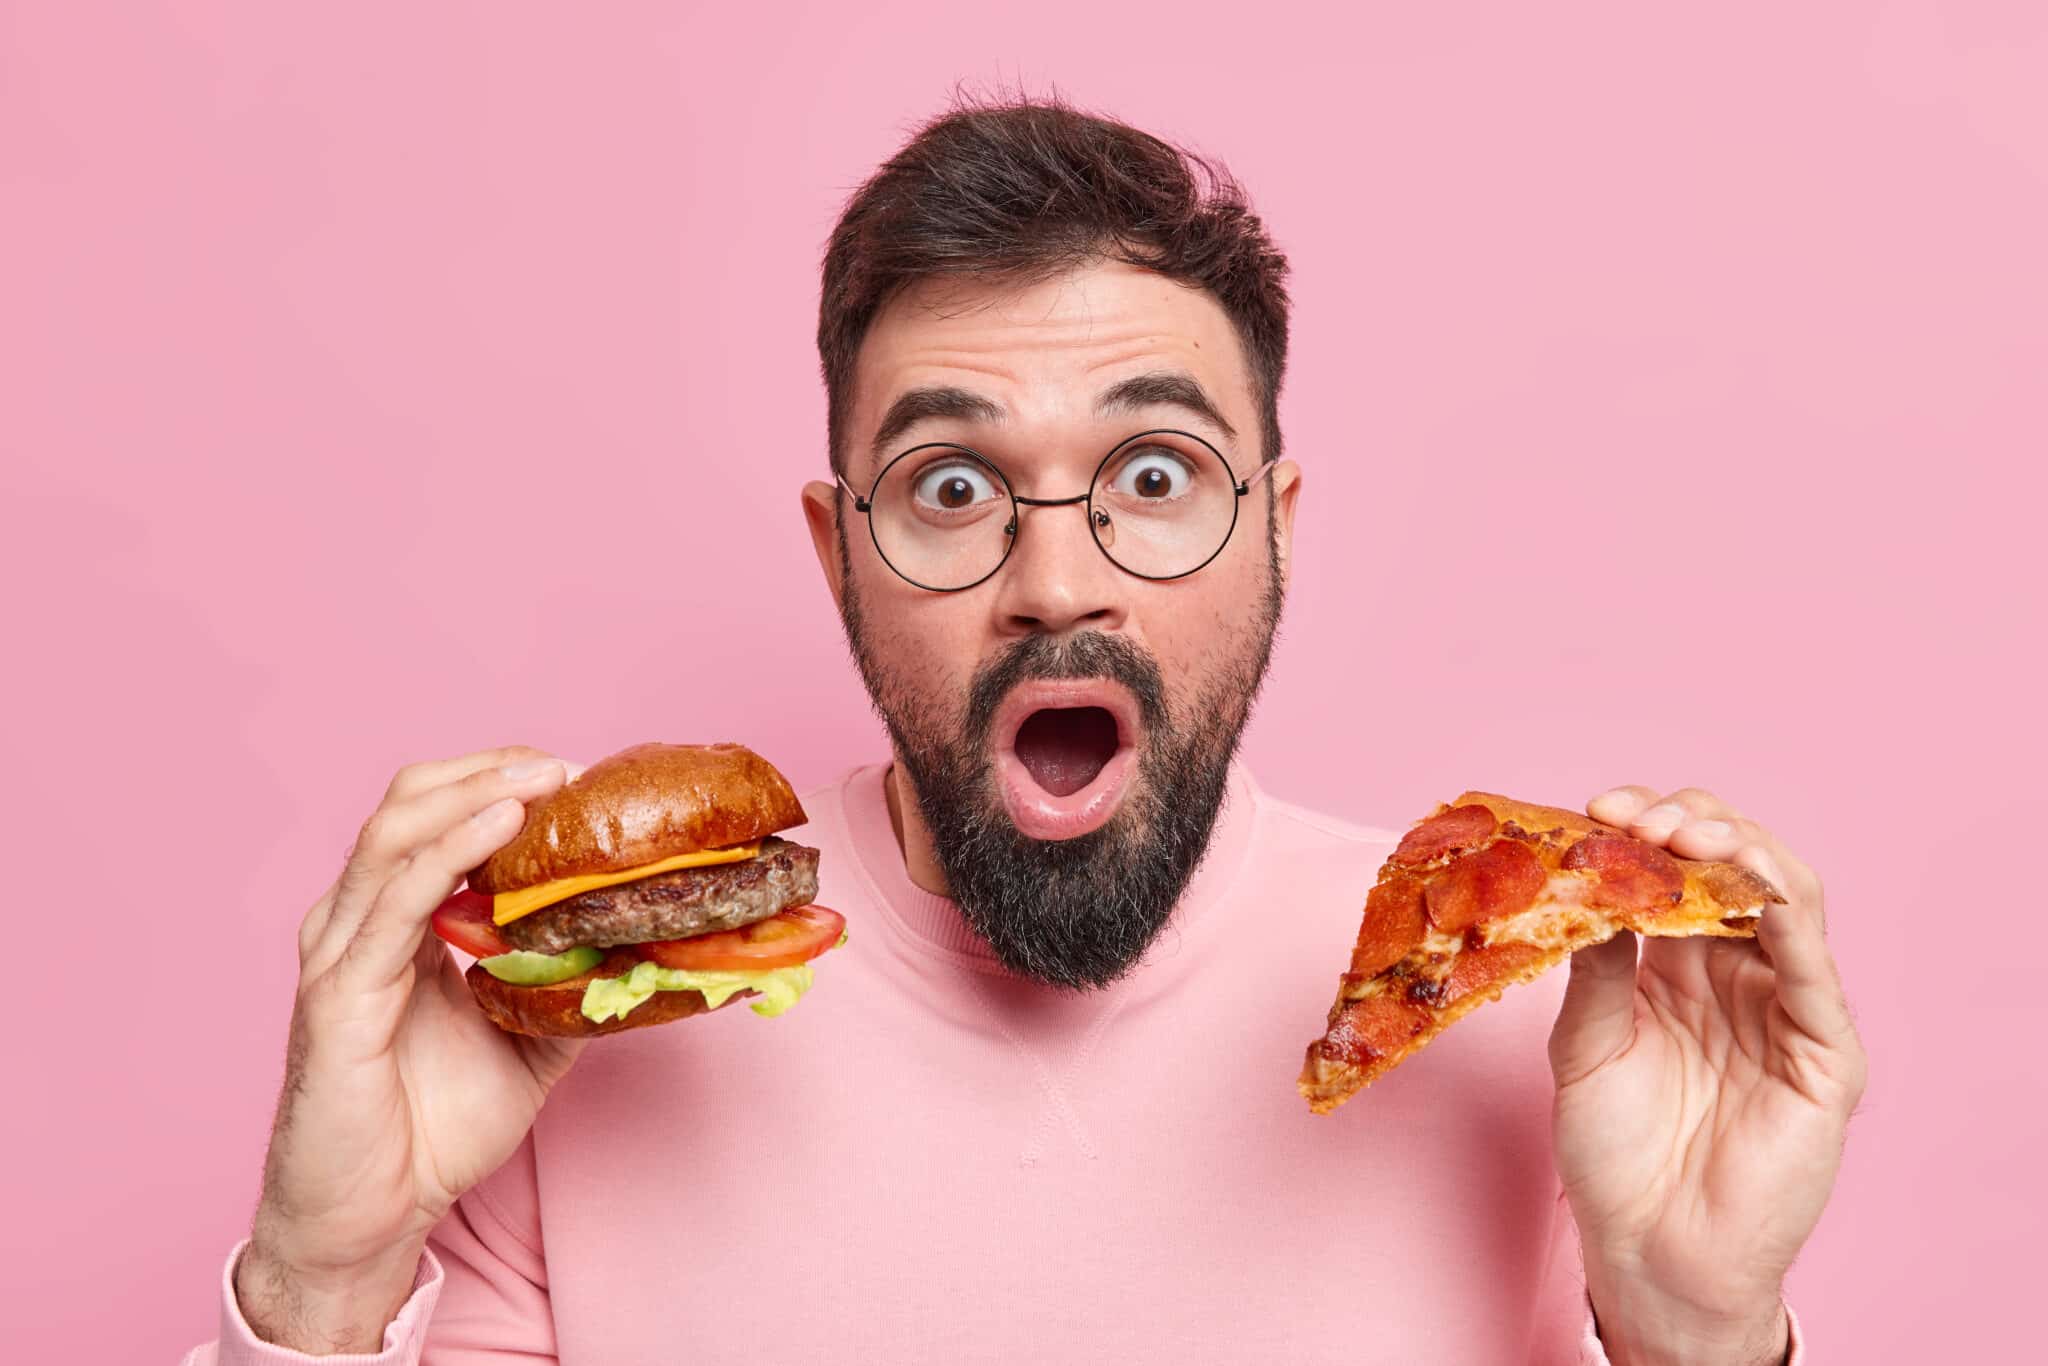 substituir fast food por alimentos saudáveis receitas saudáveis Surprised bearded man holds piece of pizza and hamburger eats junk food shocked to consume much calories wears round spectacles casual jumper isolated over pink background. Cheat meal concept